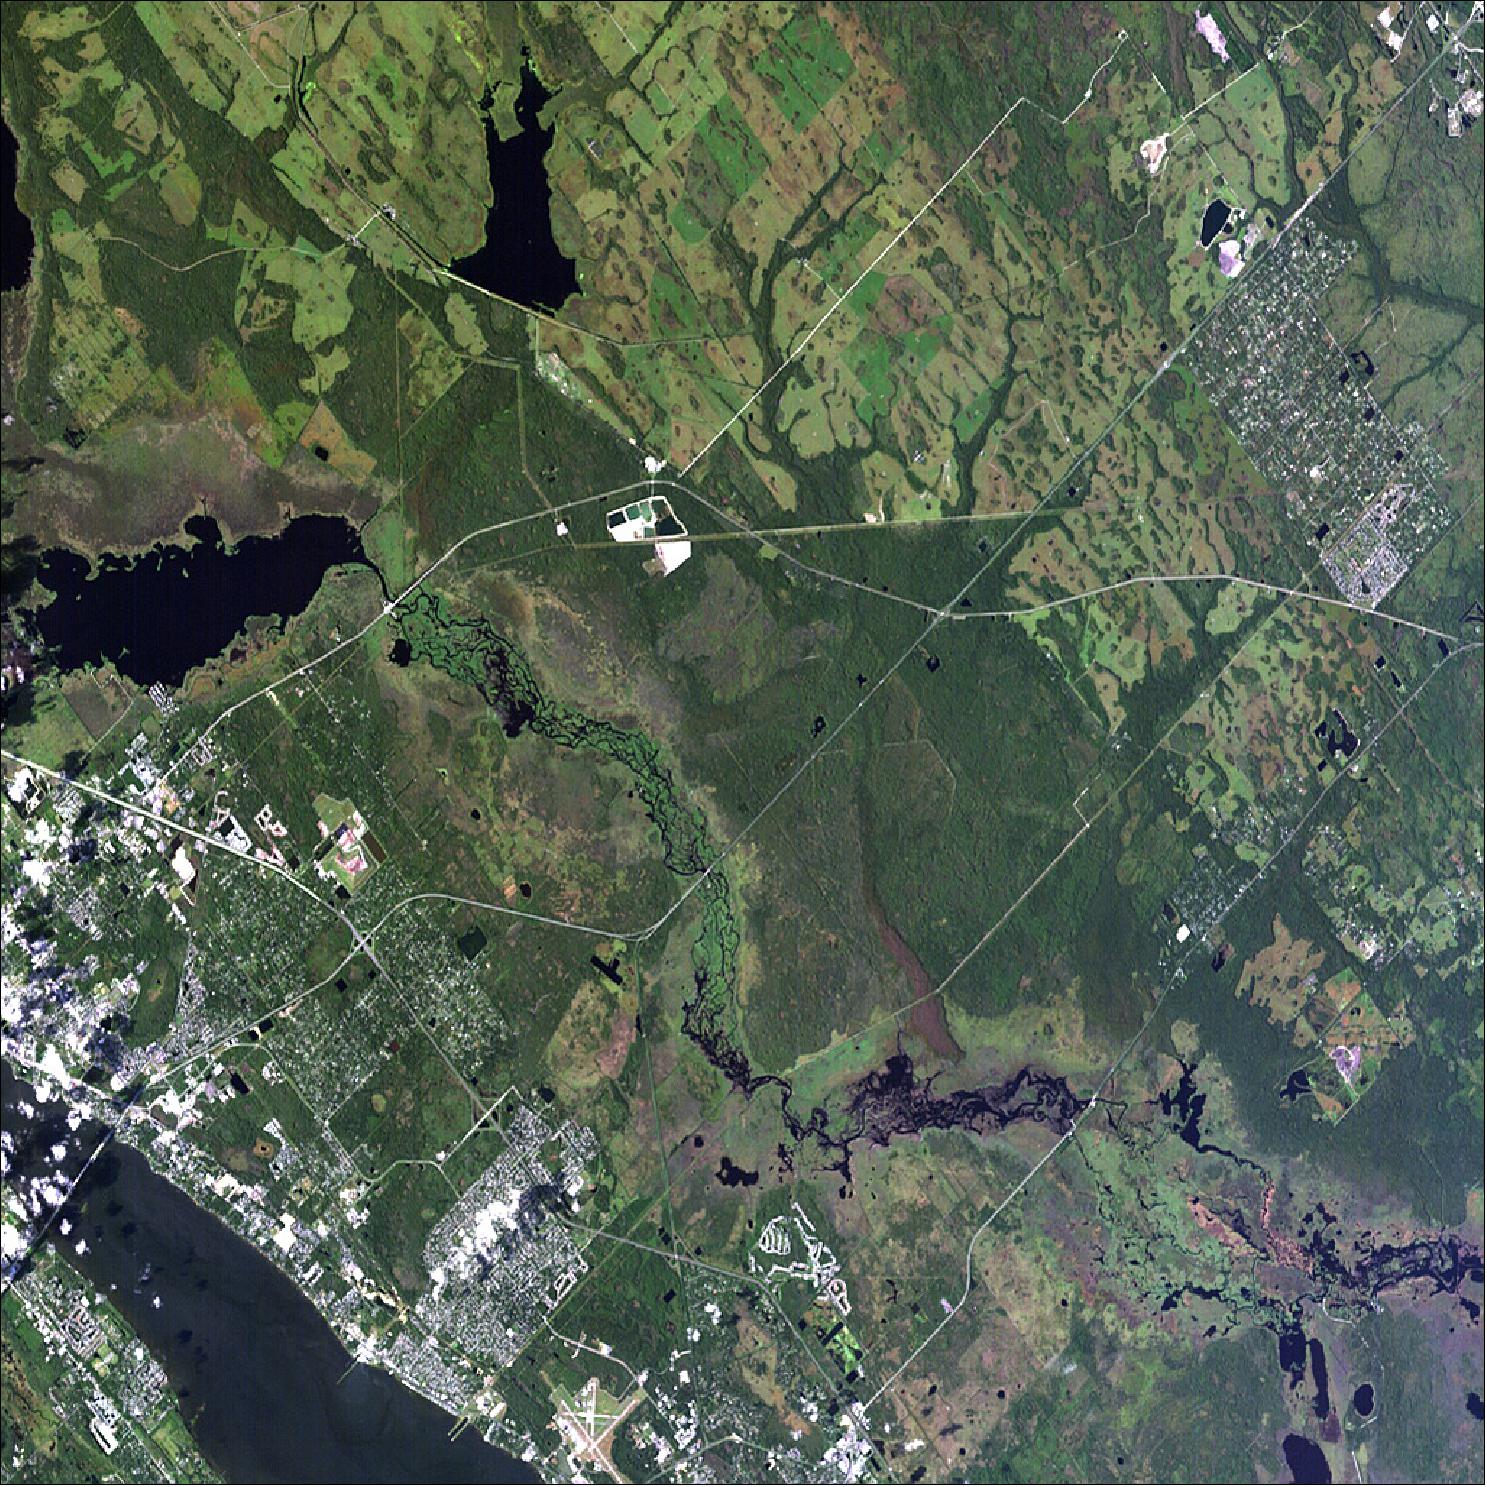 Figure 22: DESIS image of Wetland Biome, Florida, USA, Kennedy Space Center, observed on 18 October 2018, provided in February 2019 (image credit: DLR)